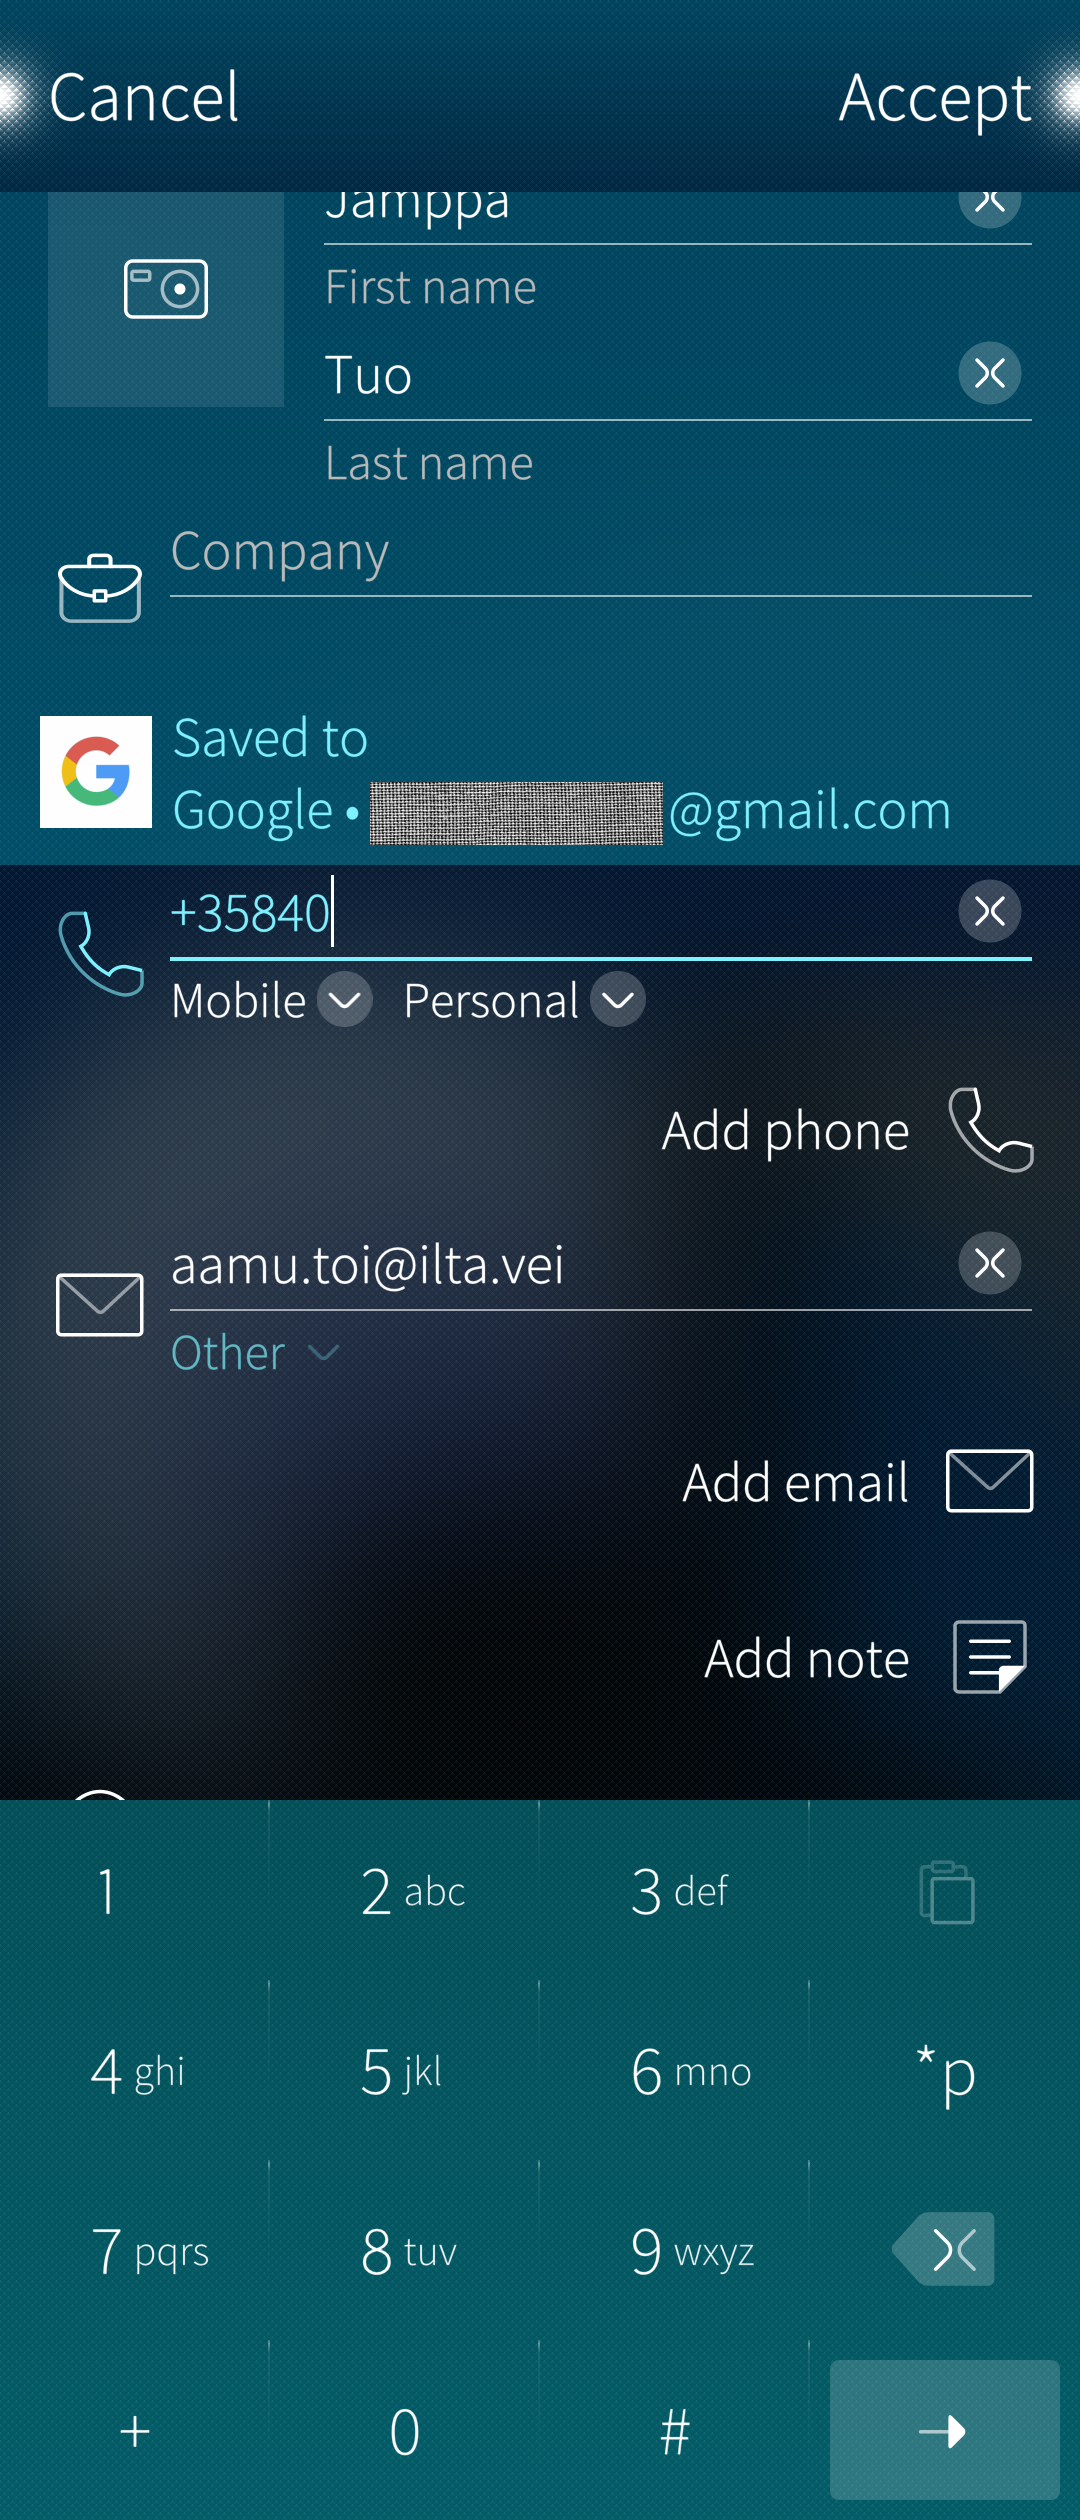 Contact to Google service